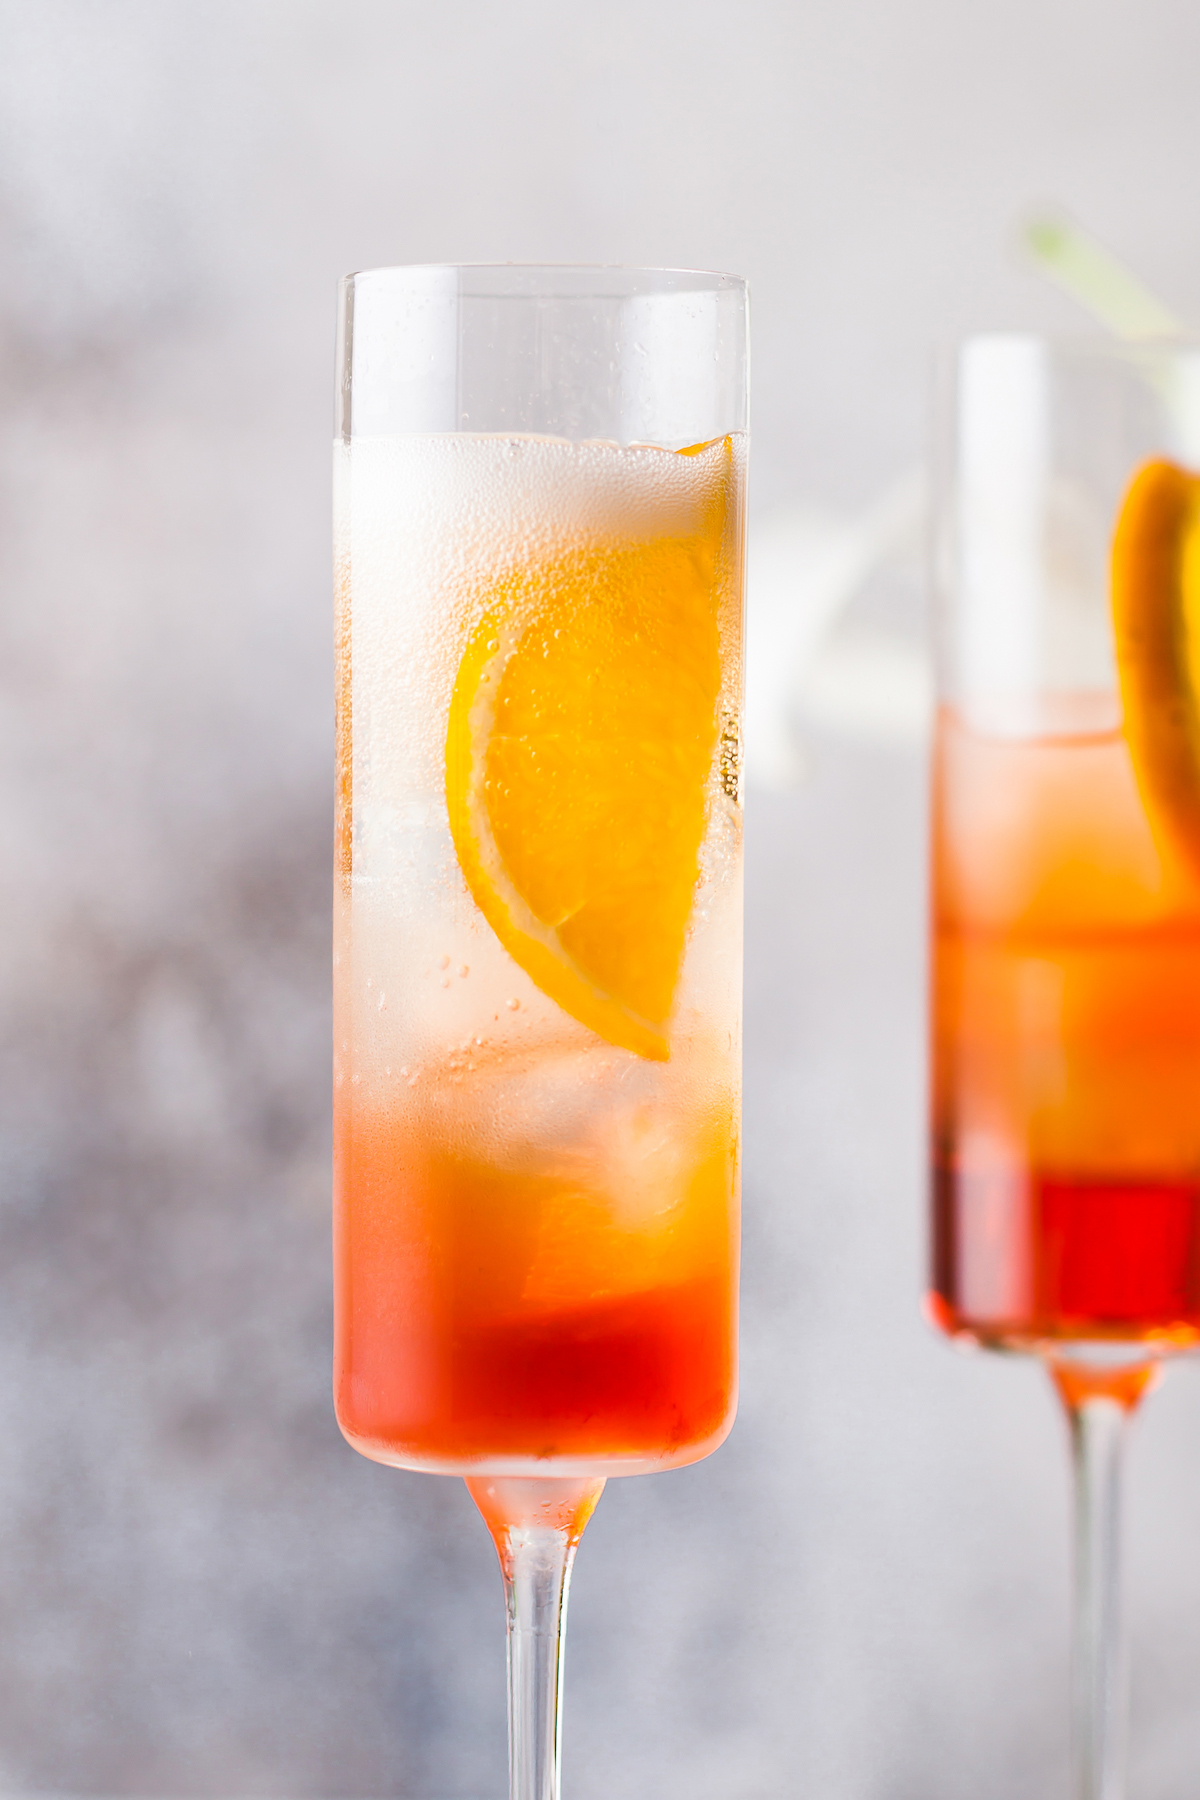 Close-up shot of two Aperol spritzes, with orange slices in the glasses against the sides of the glasses.